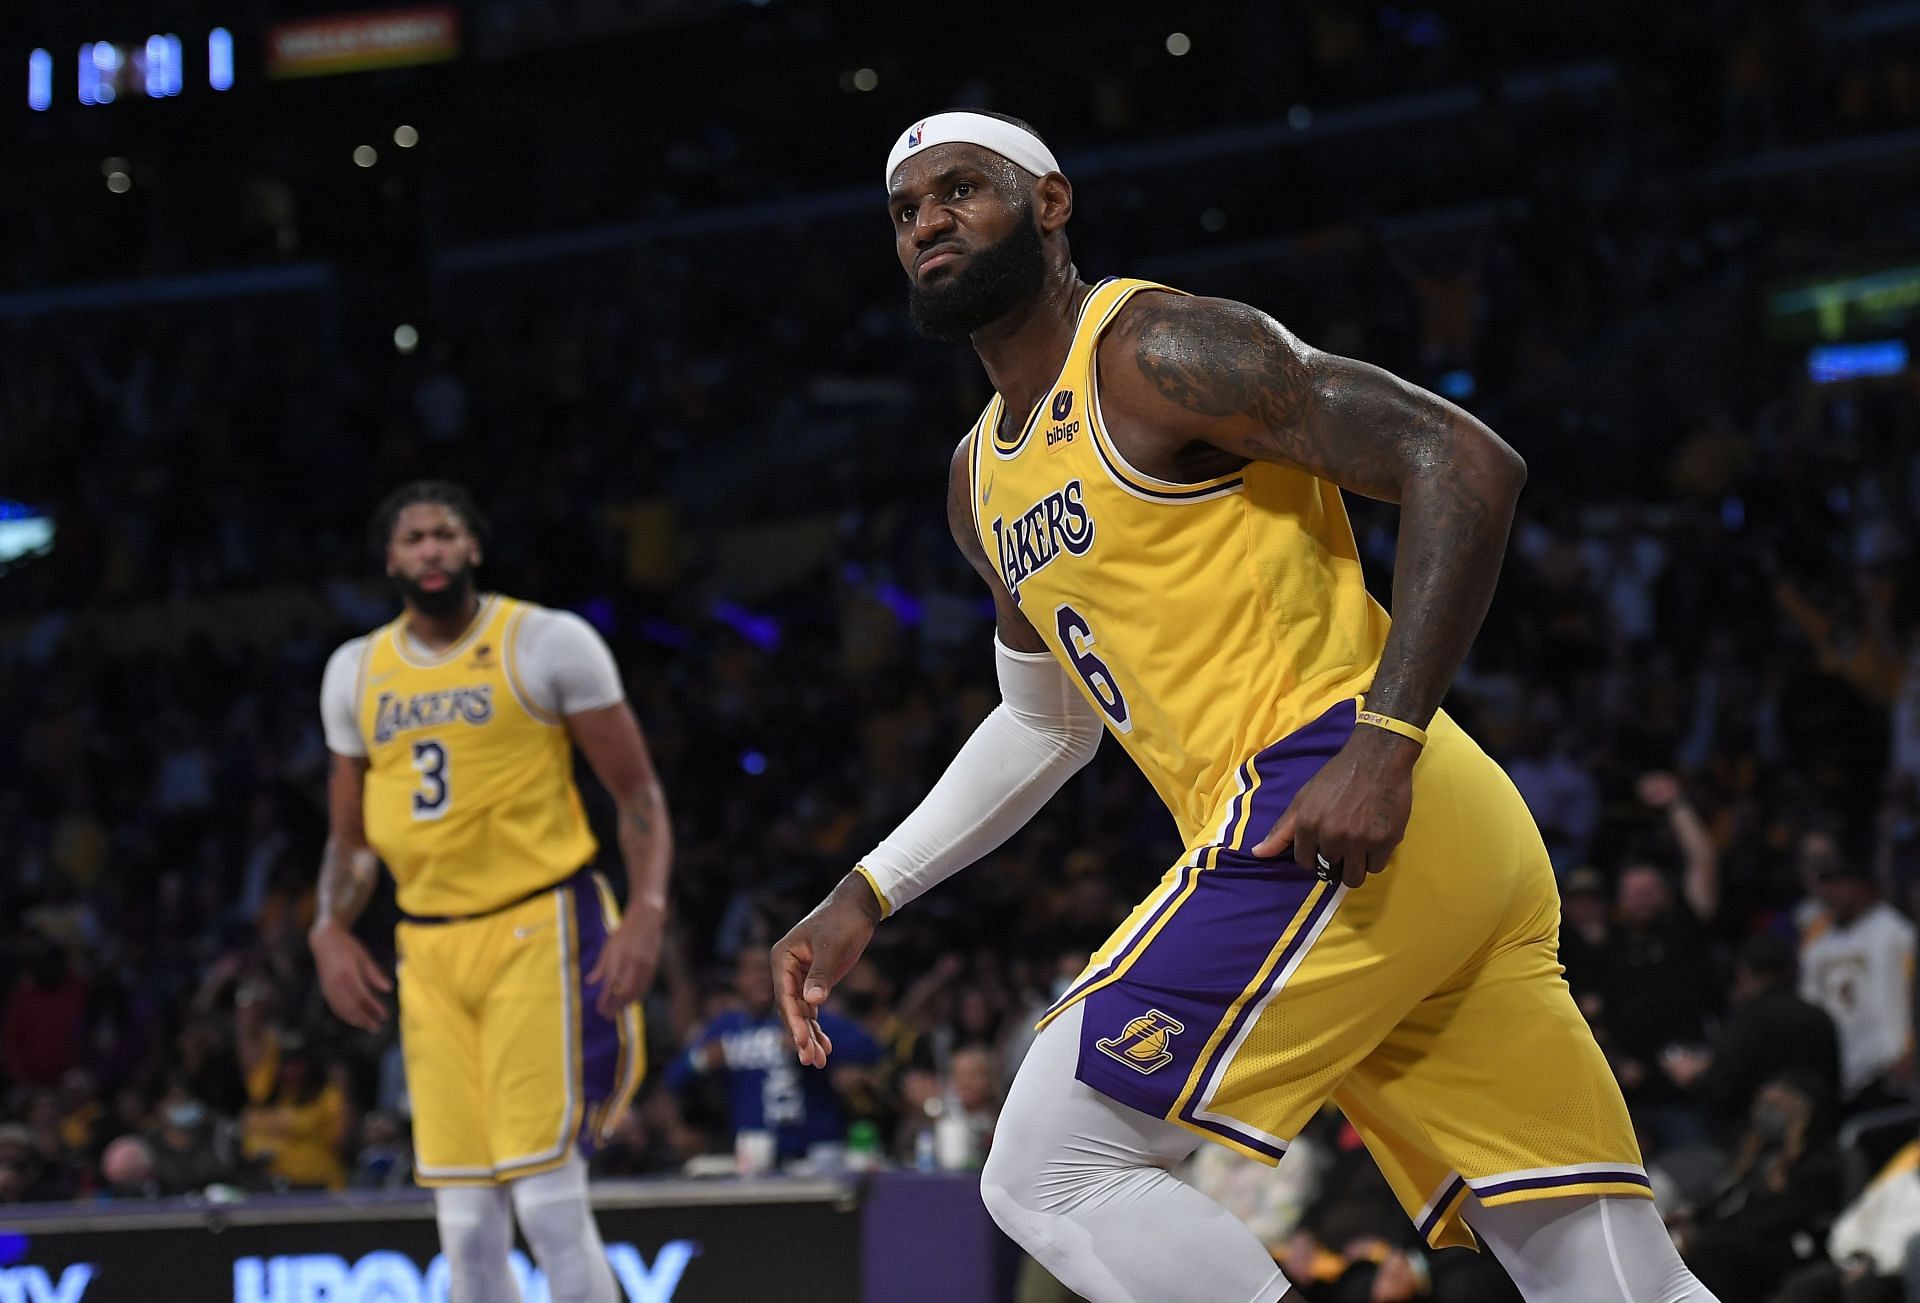 LeBron James #6 of the Los Angeles Lakers reacts after scoring during the second half against the Golden State Warriors at Staples Center on October 19, 2021 in Los Angeles, California.